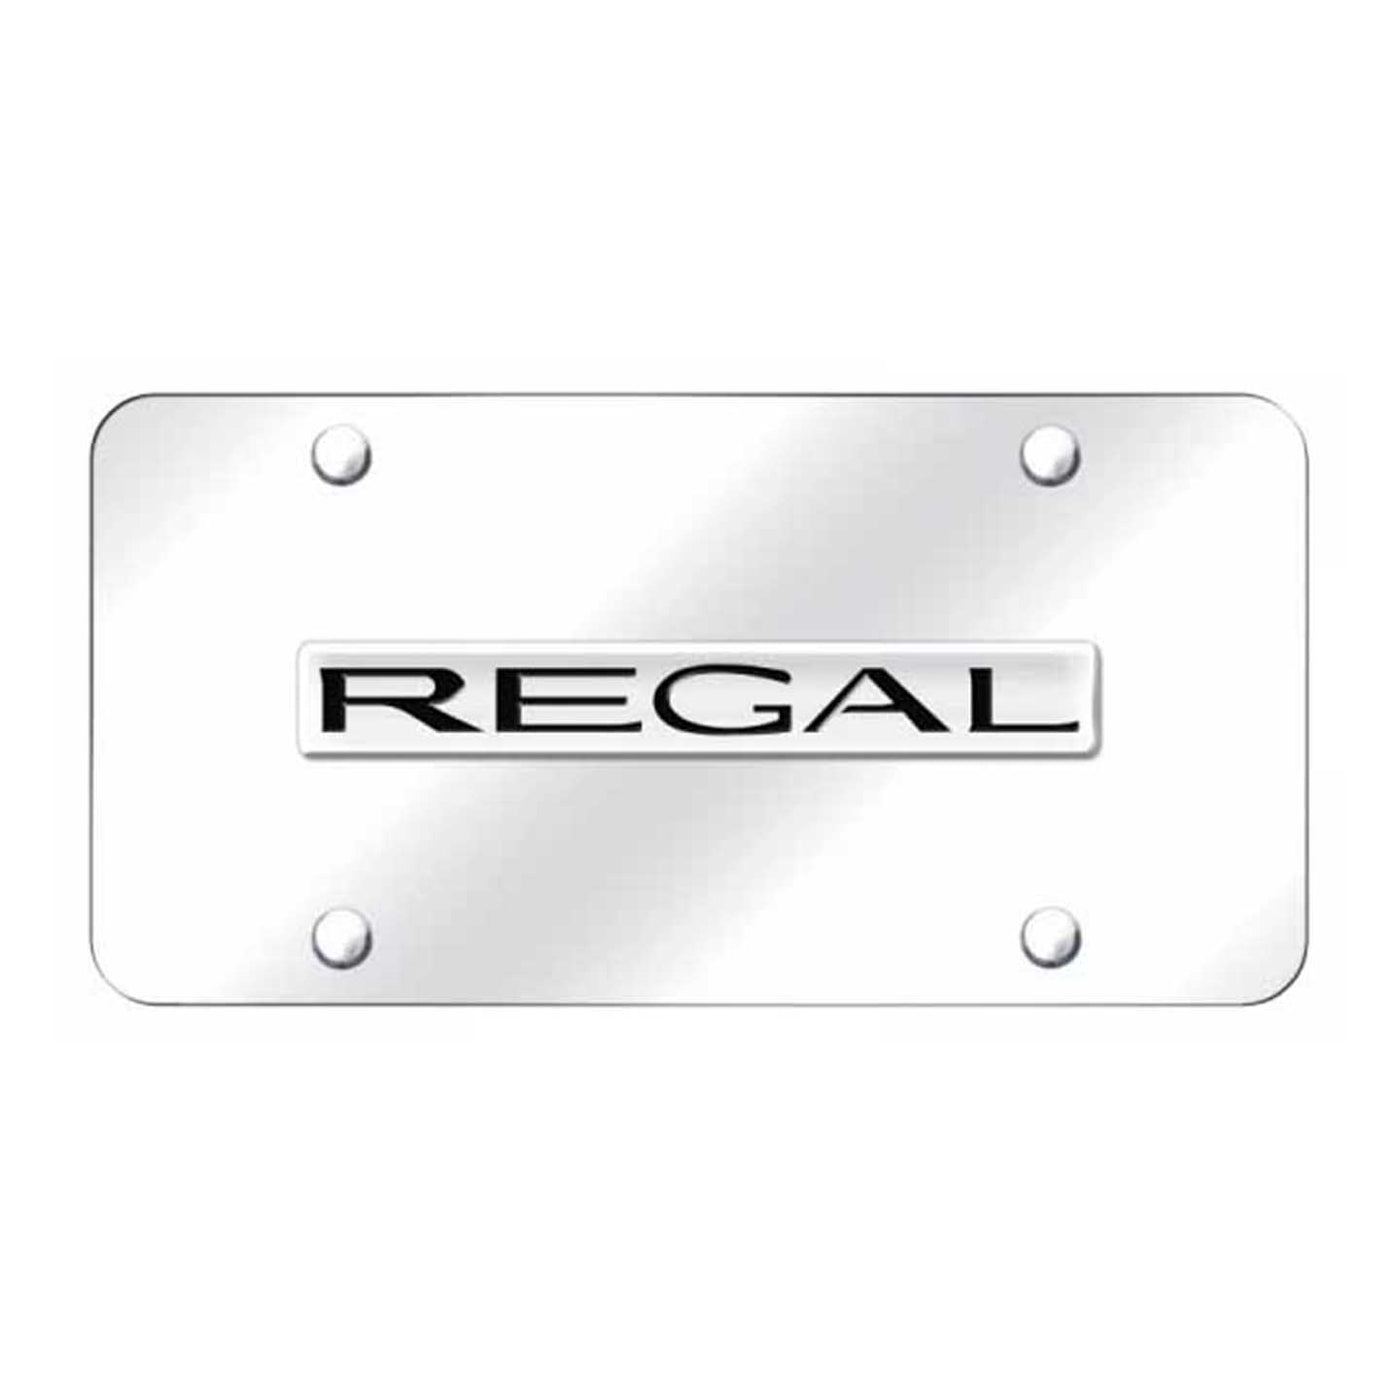 Regal Name License Plate - Chrome on Mirrored